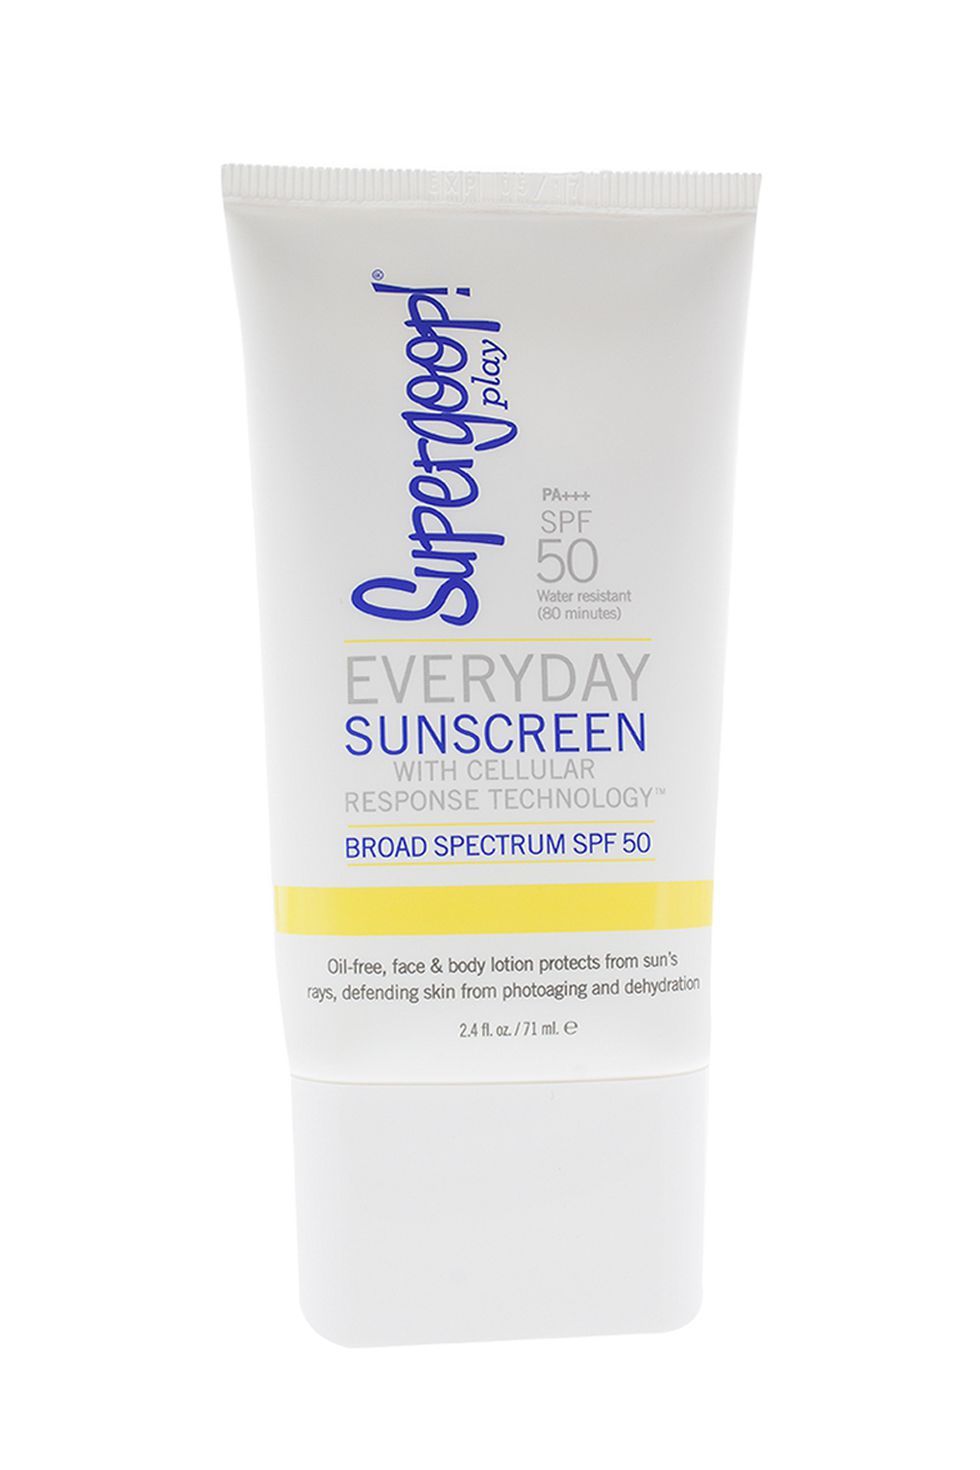 who makes supergoop sunscreen